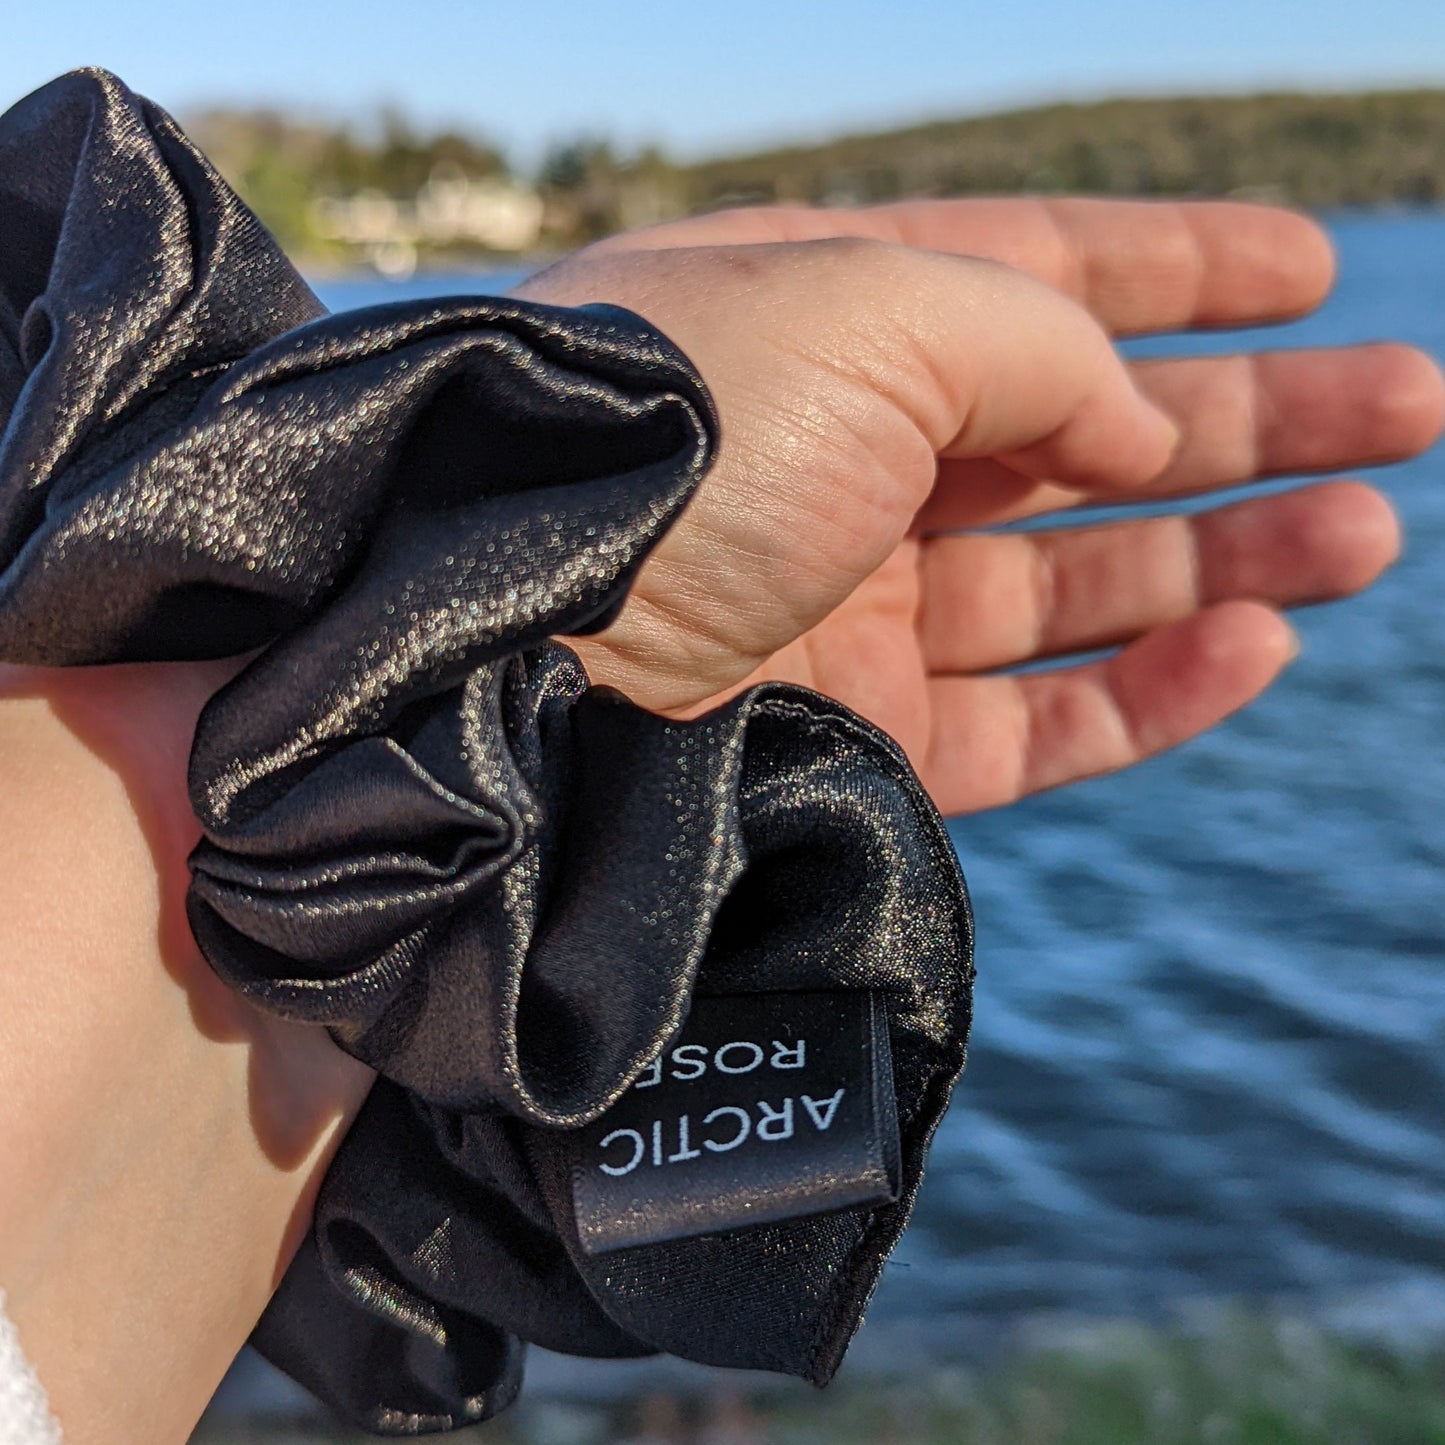 Black satin scrunchie on wrist with lake in background, the perfect summer hair accessory